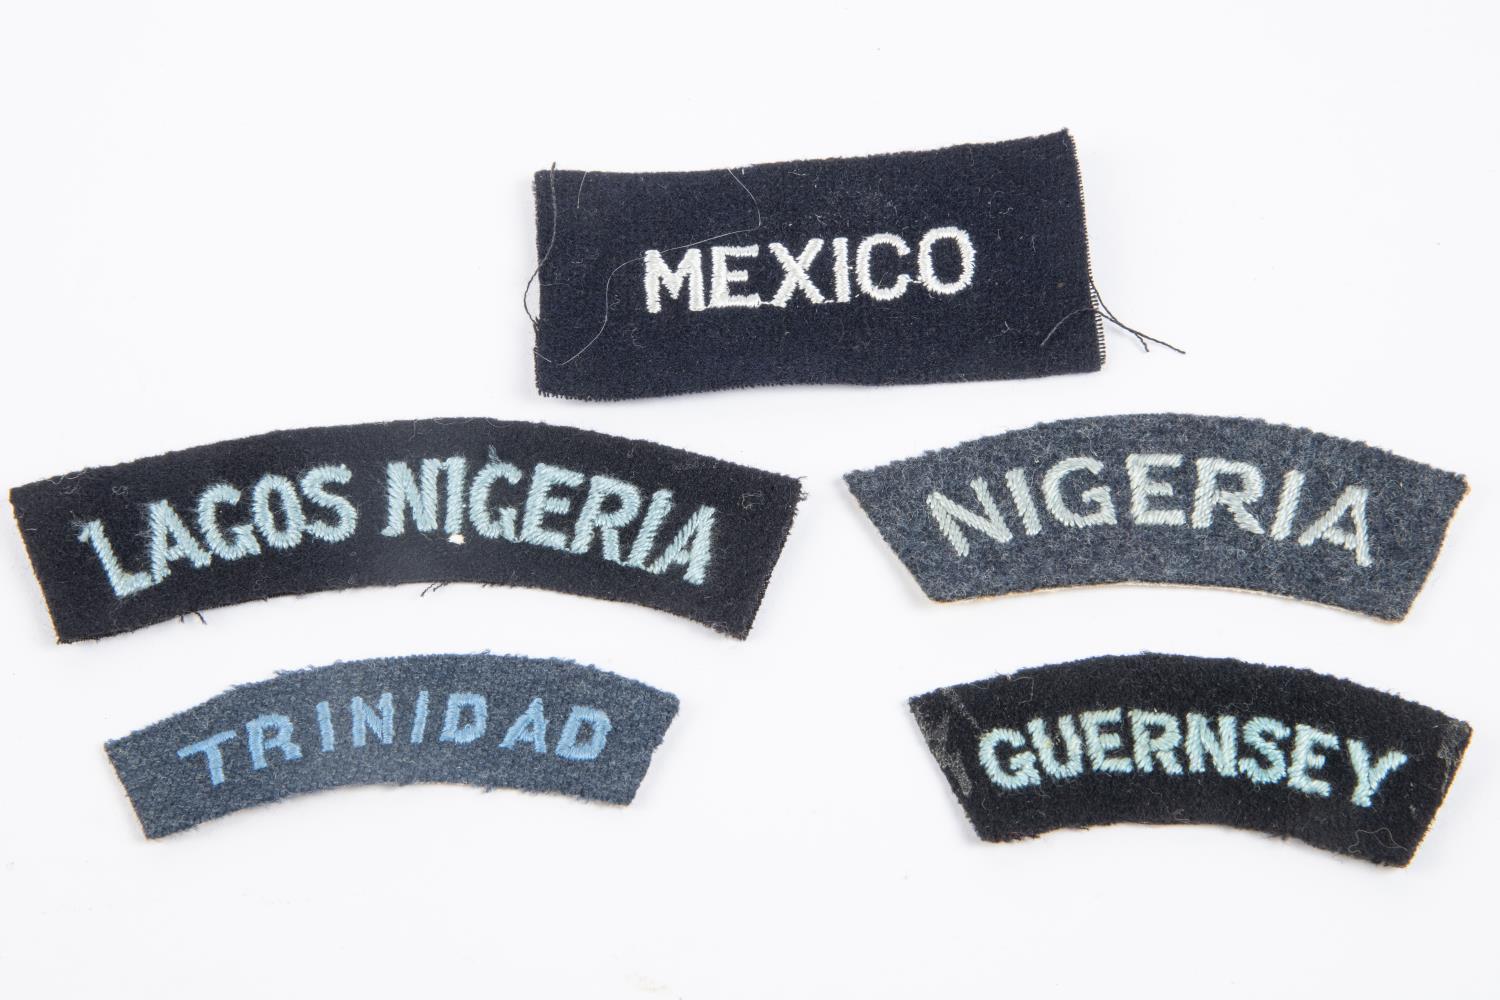 A selection of WWII RAF Nationality titles: Lagos Nigeria, Nigeria, Guernsey, Mexico and